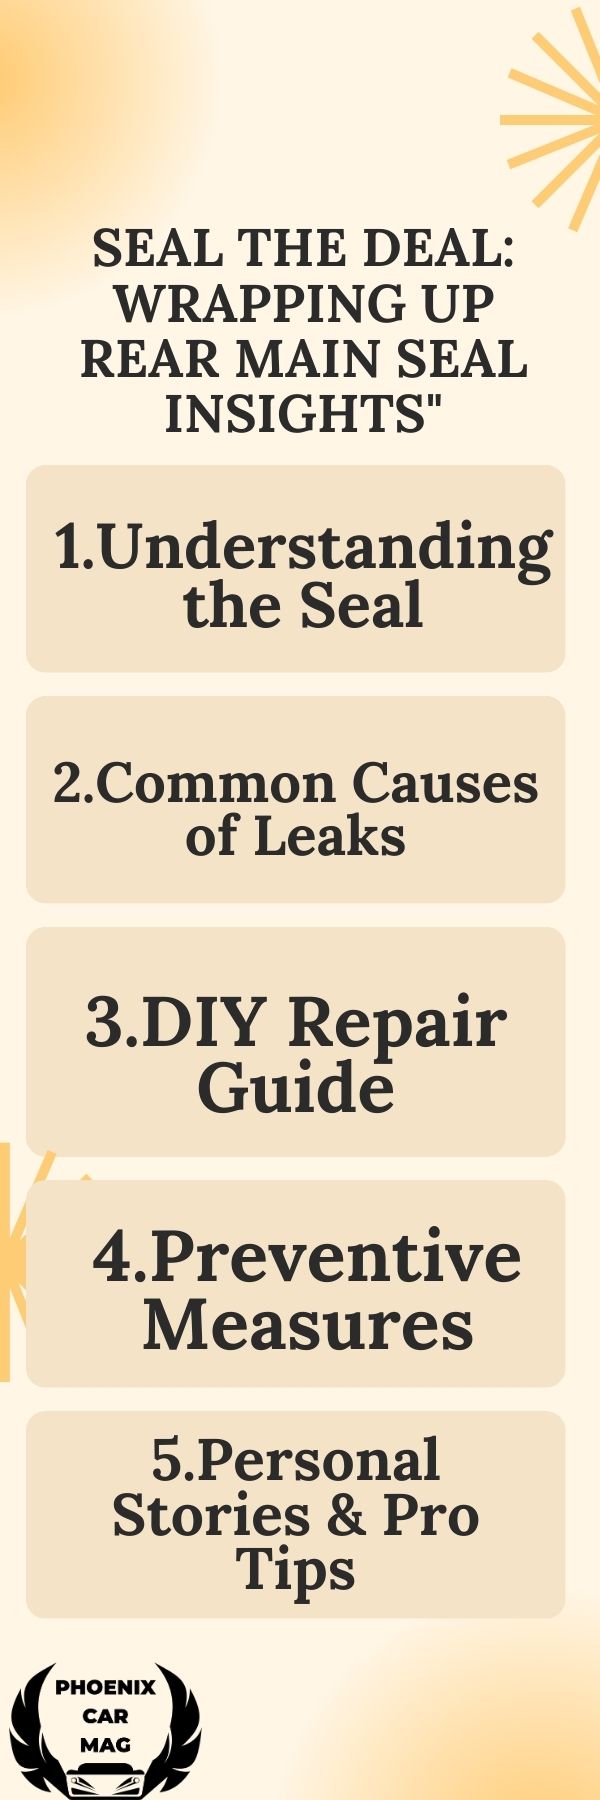 infographic of "Seal the Deal: Wrapping Up Rear Main Seal Insights"